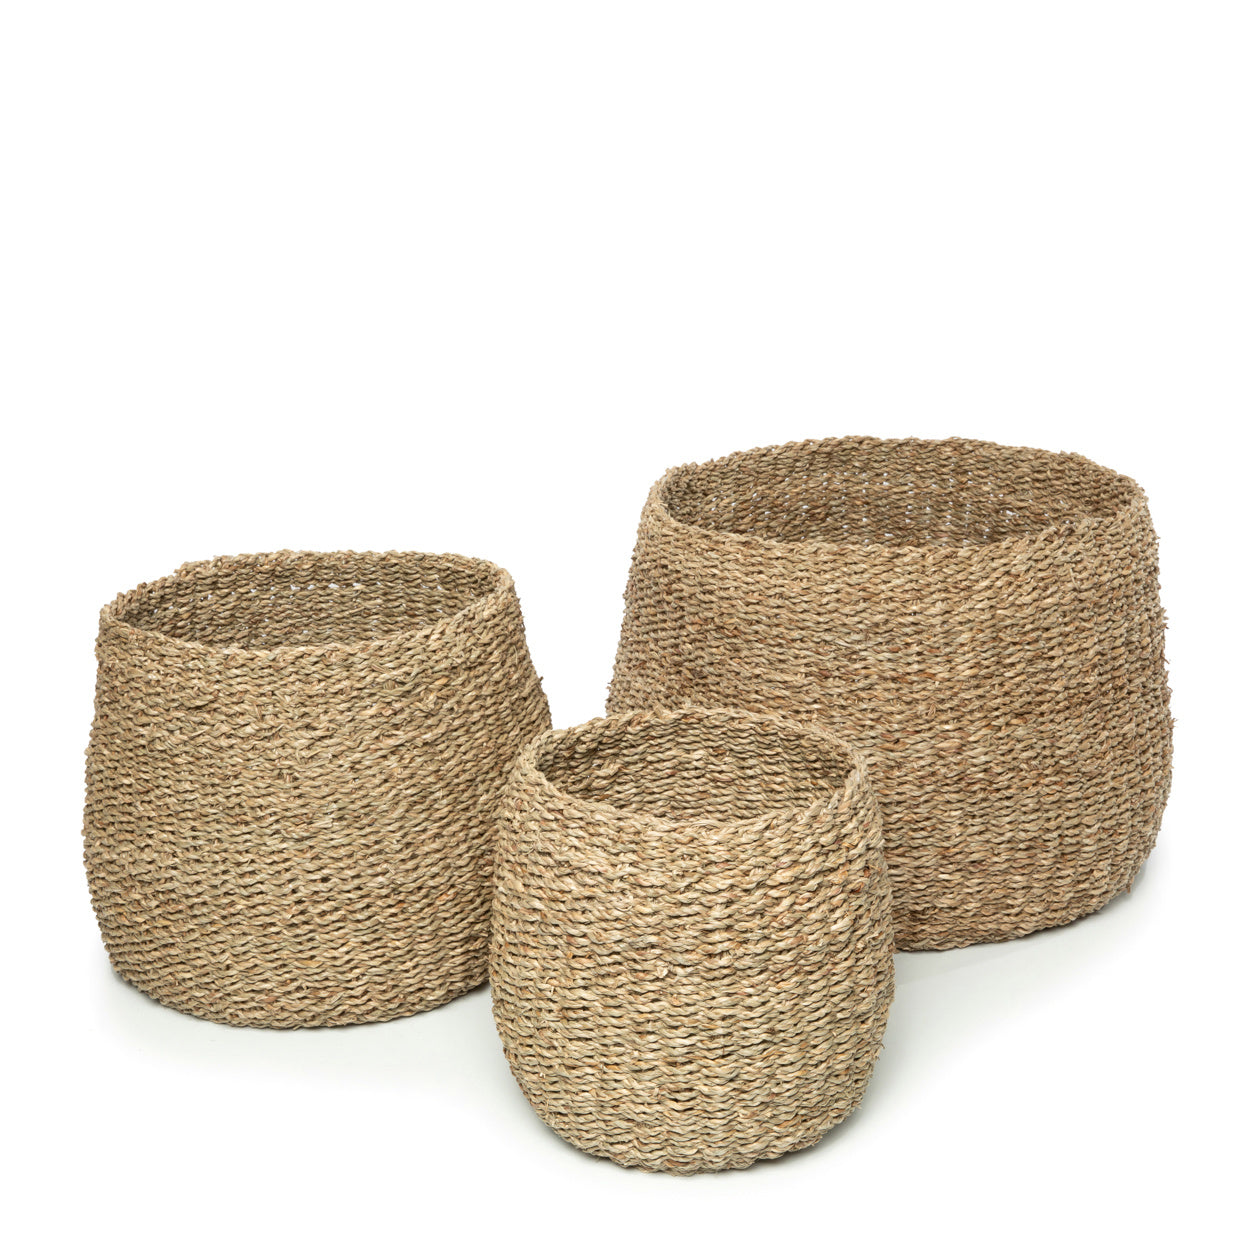 THE VUNG LAM Baskets Set of 3 front view